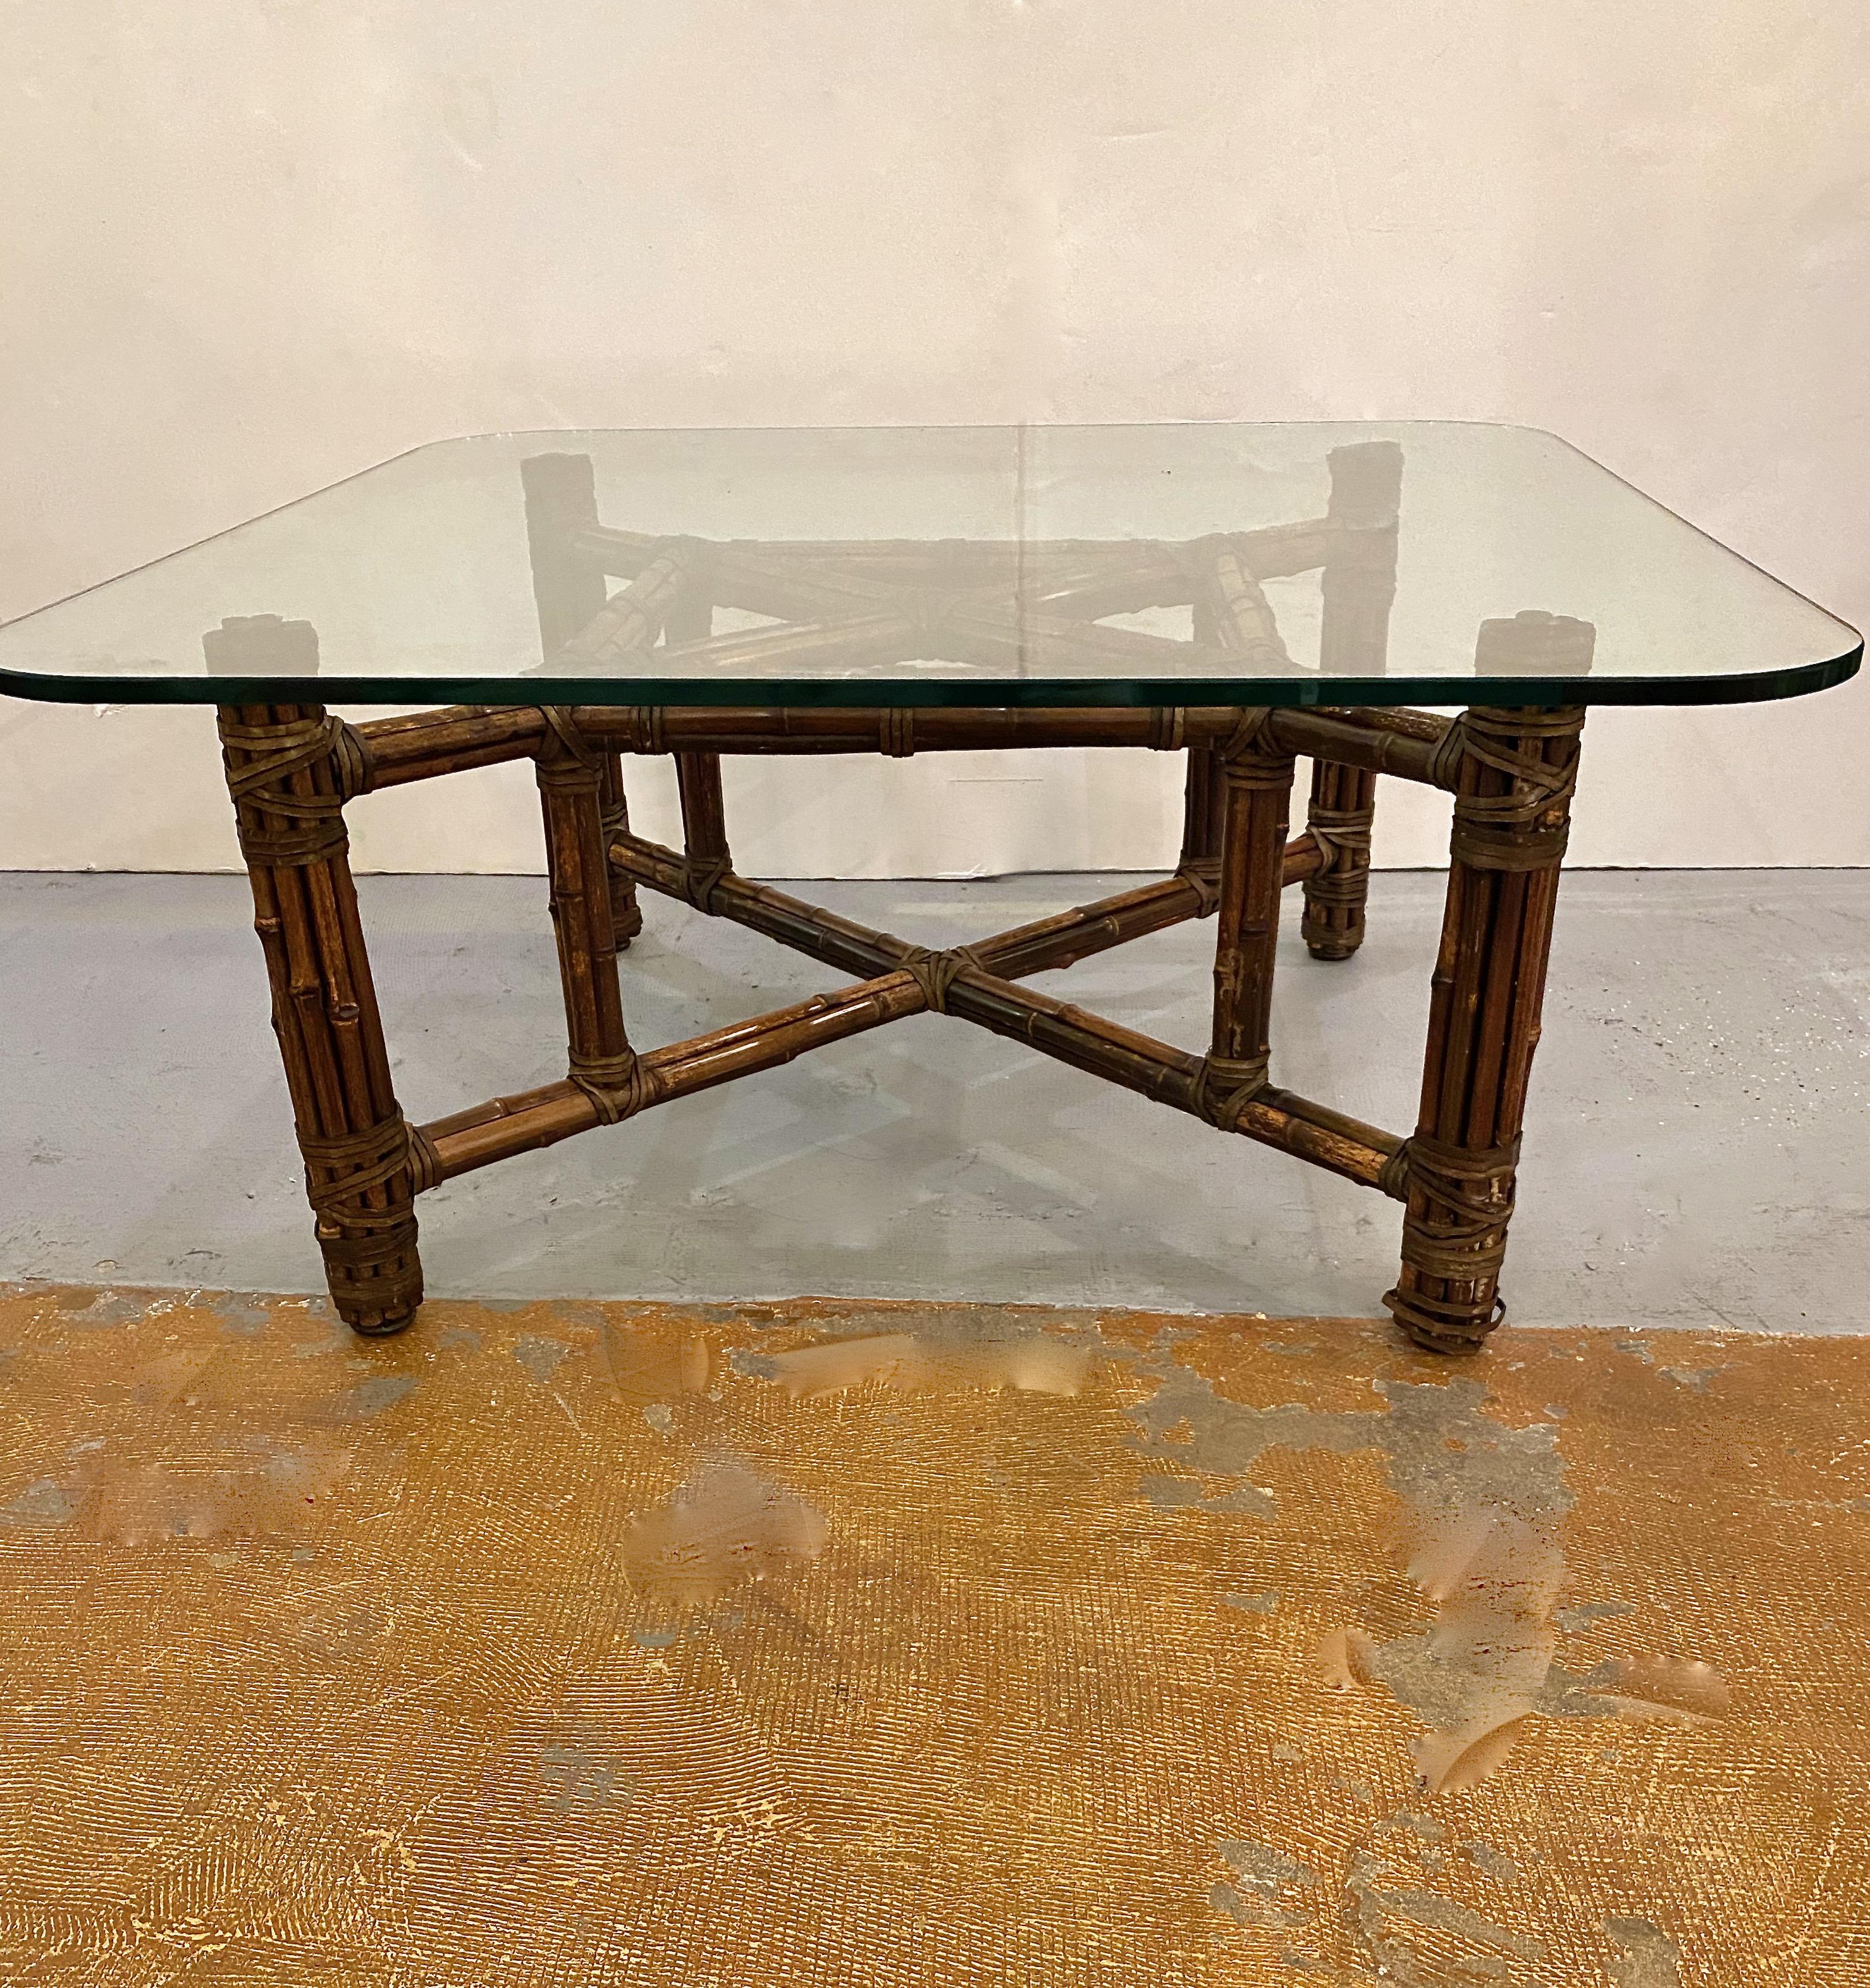 This is a charming McGuire-attributed small coffee table. All design details conform to McGuire tables, but this table does not retain a McGuire tag. The table is in very good original condition. The replaced glass top is of the highest quality